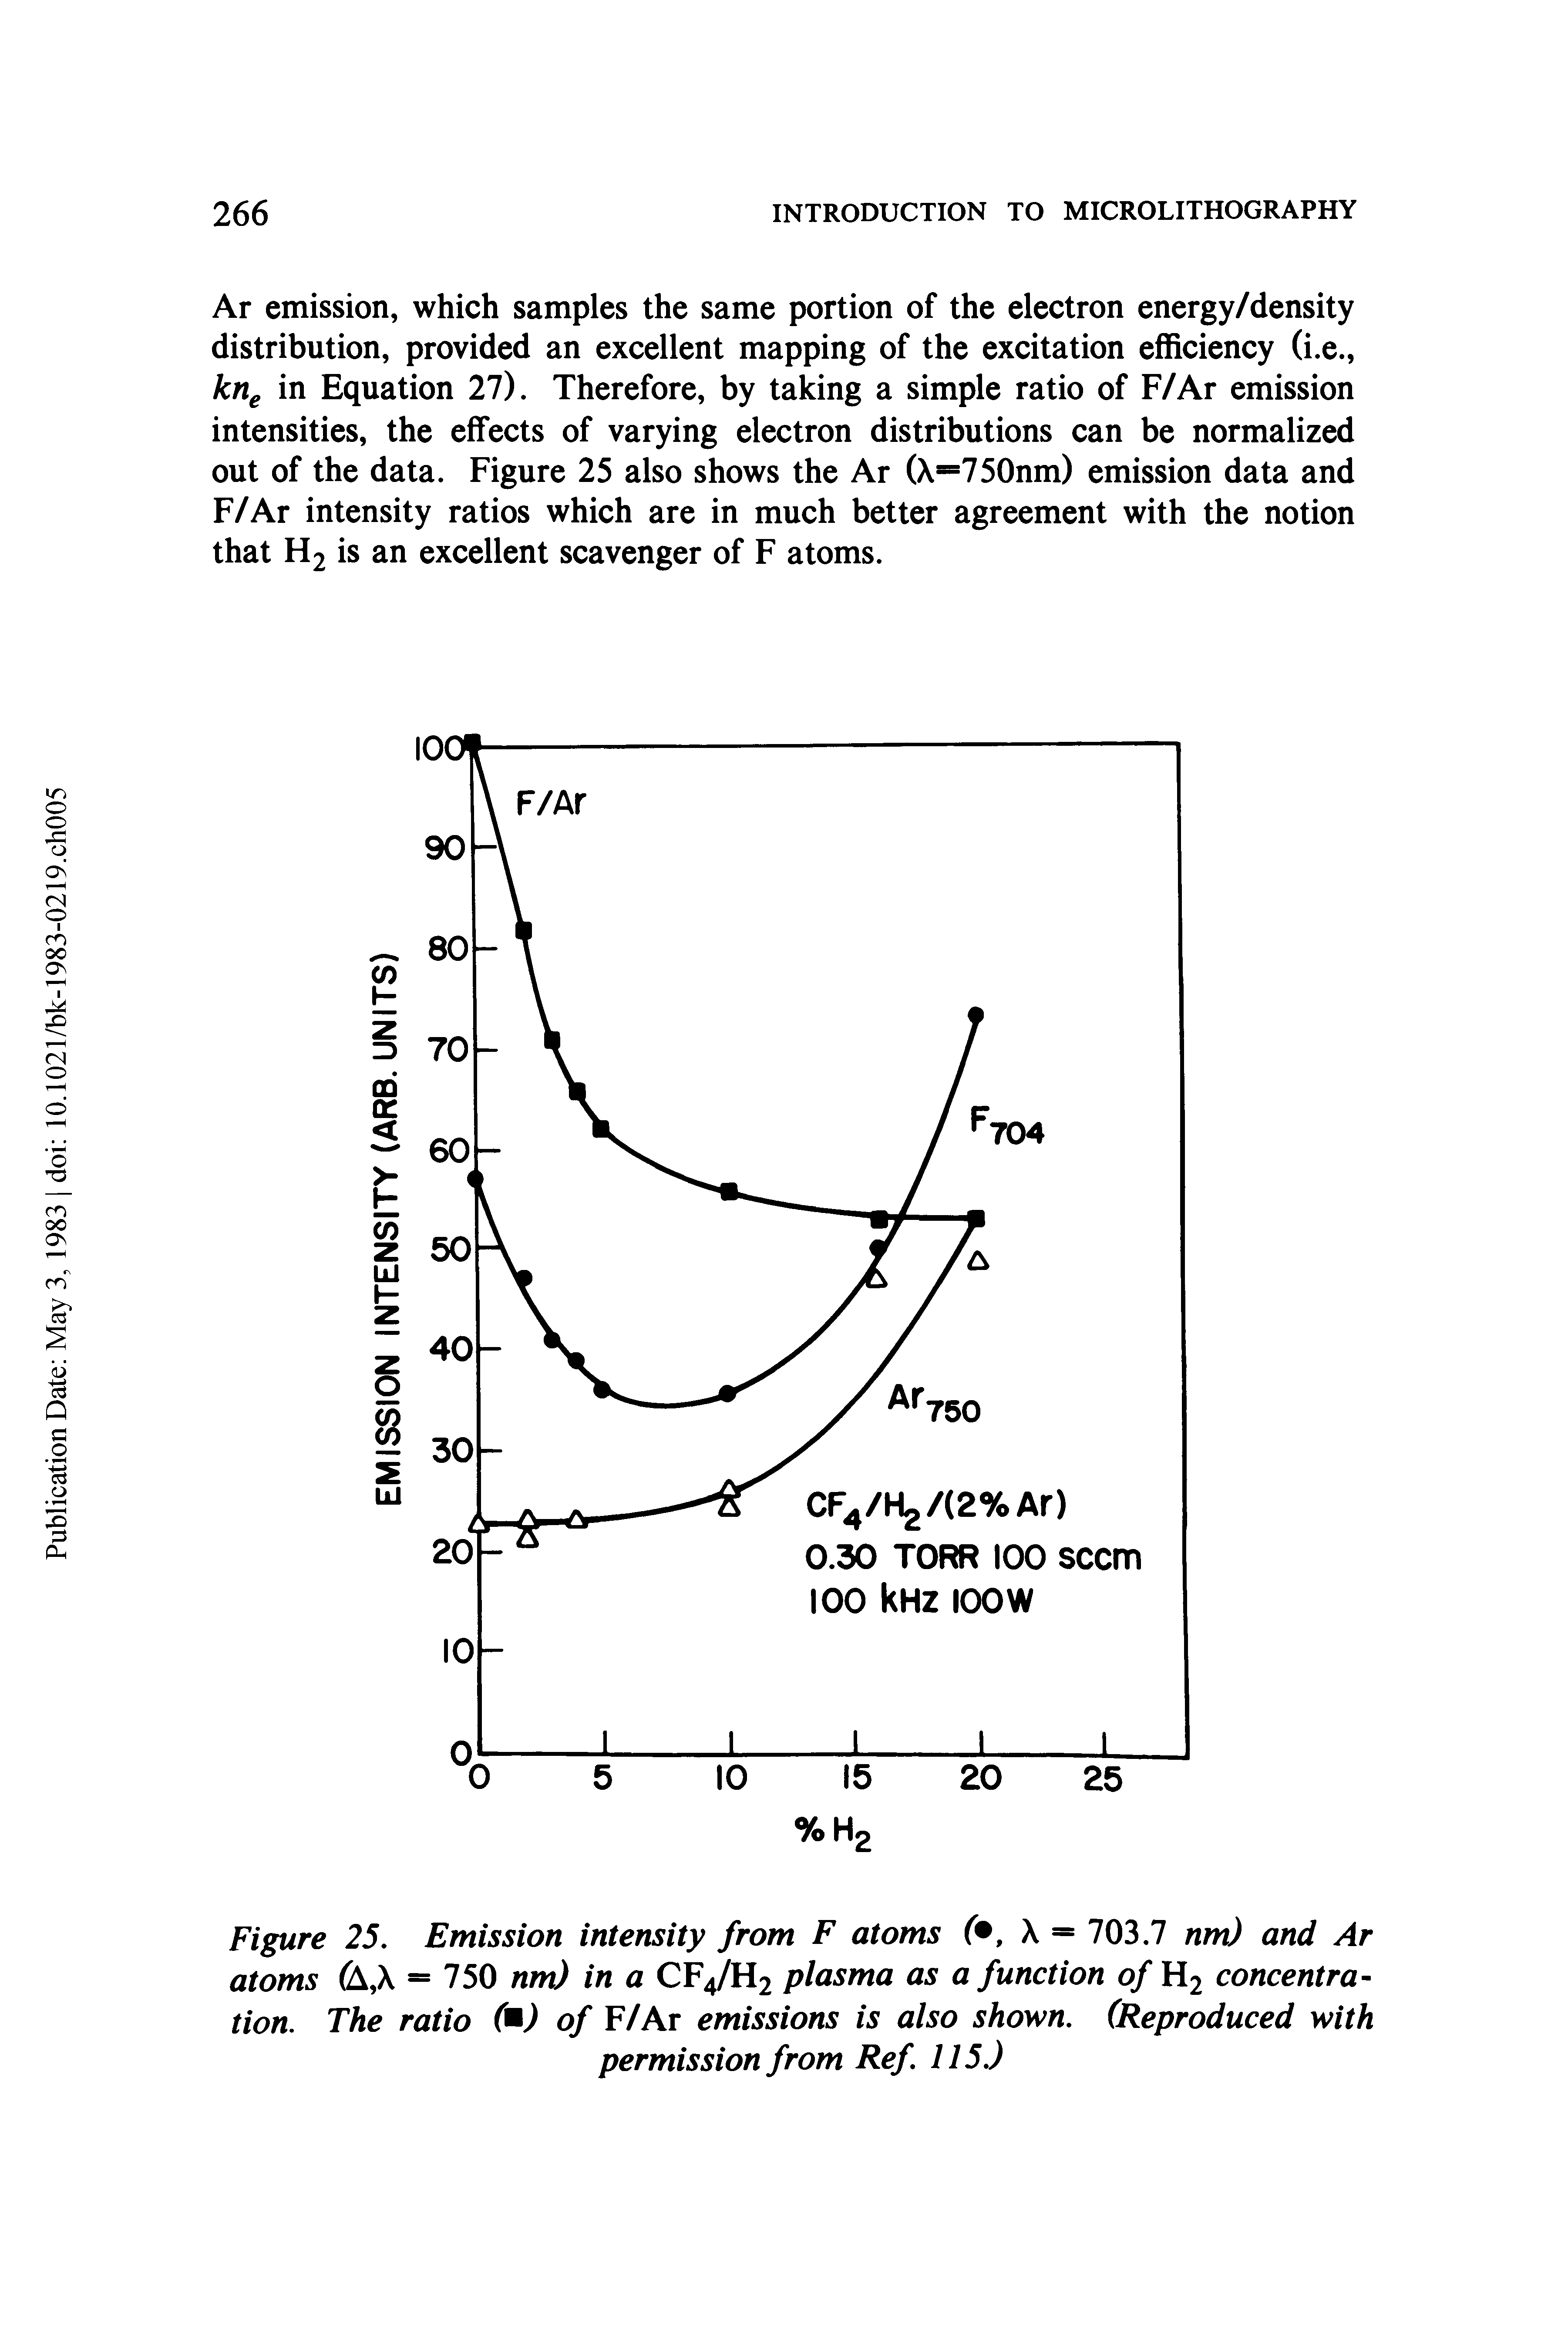 Figure 25, Emission intensity from F atoms X = 703.7 nm) and Ar atoms (A,X = 750 nm) in a CF4/H2 plasma as a function 0/H2 concentration. The ratio ( ) of F/Ar emissions is also shown. (Reproduced with permission from Ref 115.)...